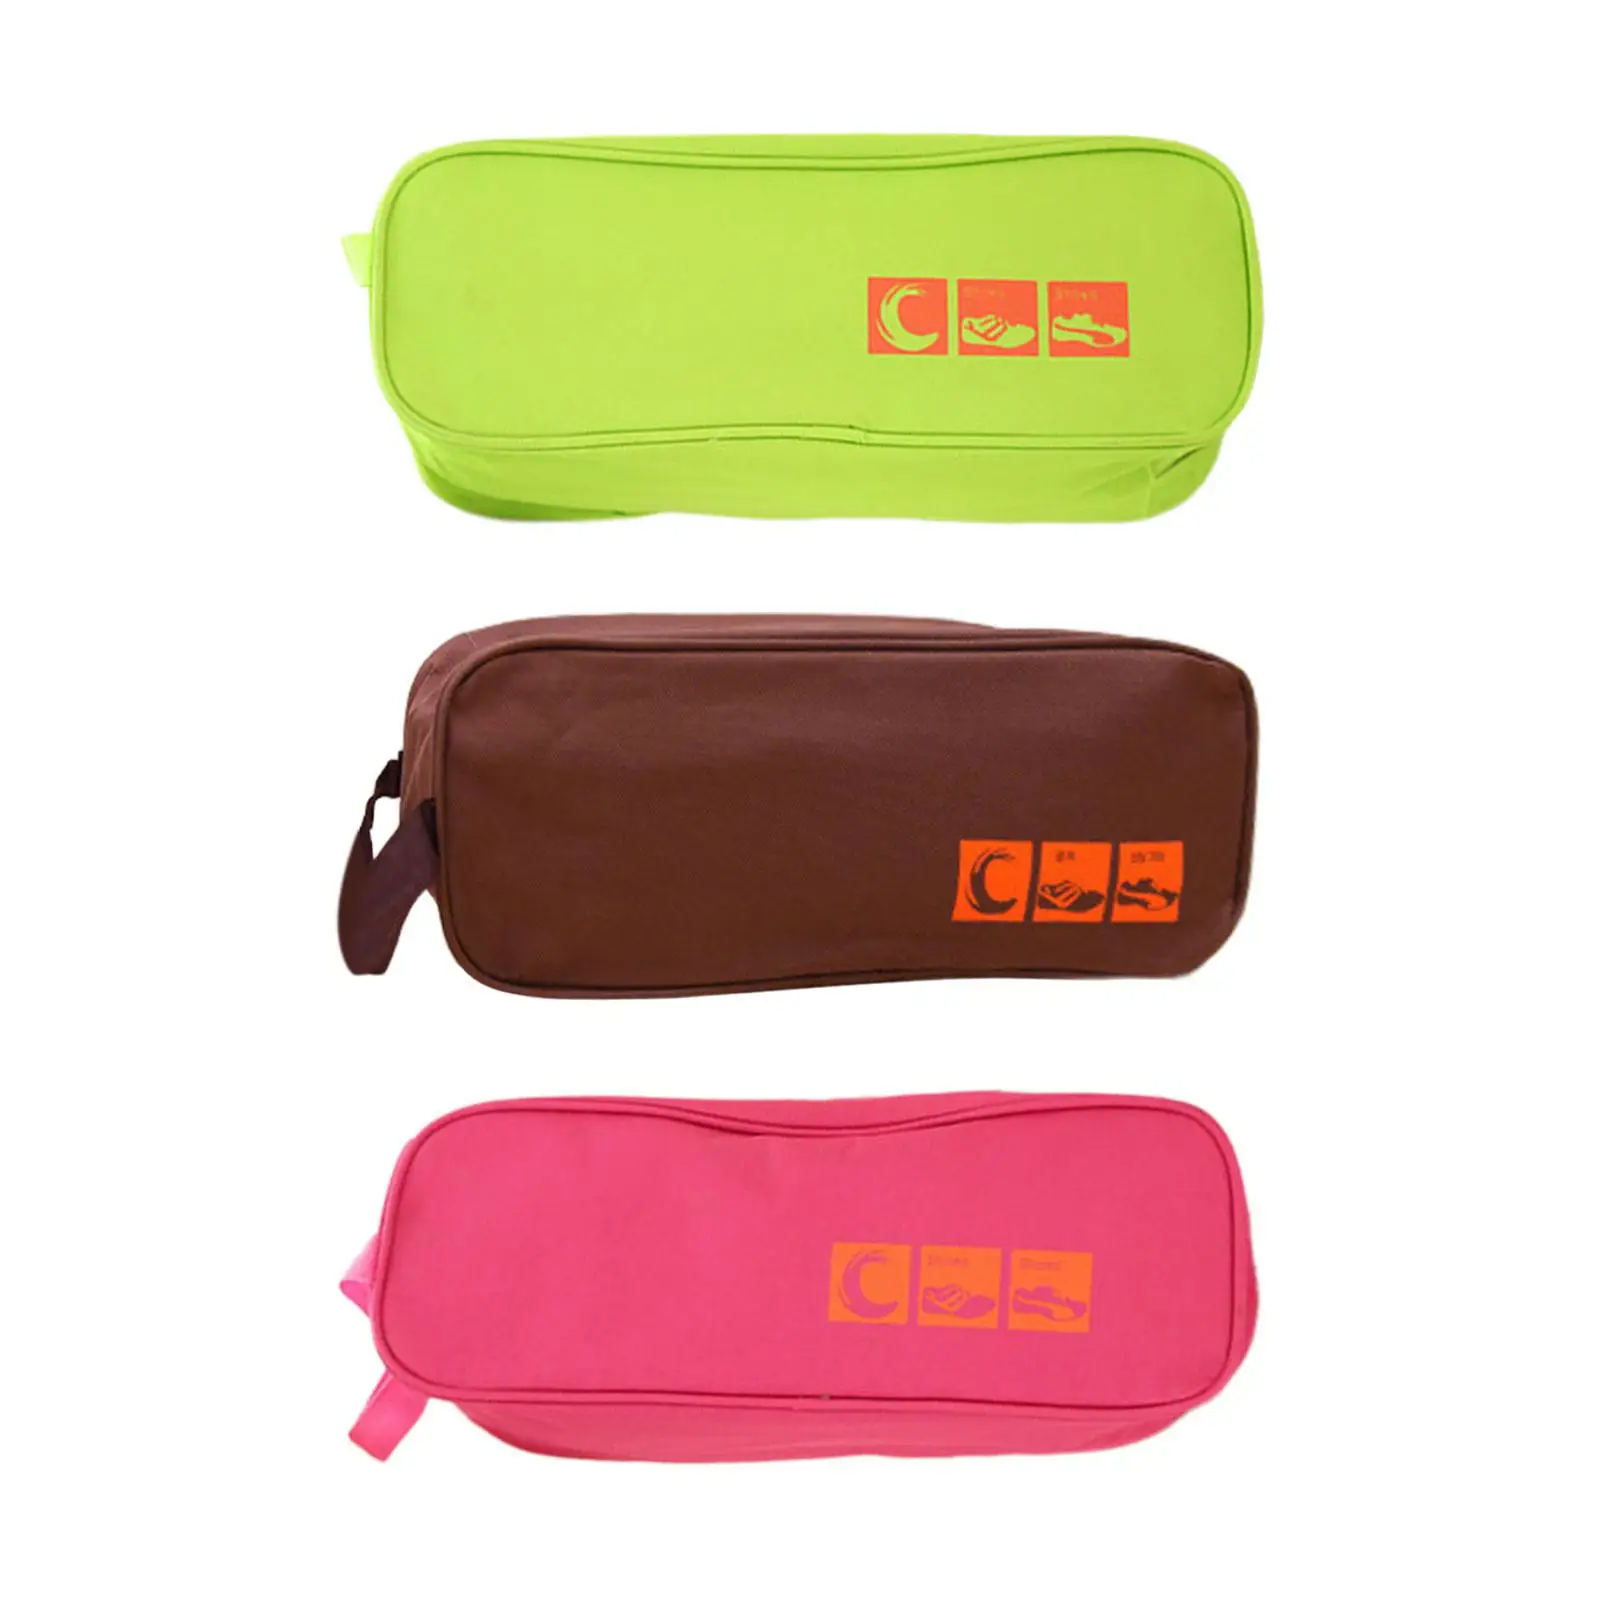 Travel Shoe Bag for Packing Water Resistant Dustproof Shoe Pouches for Traveling Shoe Organizer Bag for Trip Home Luggage Sports